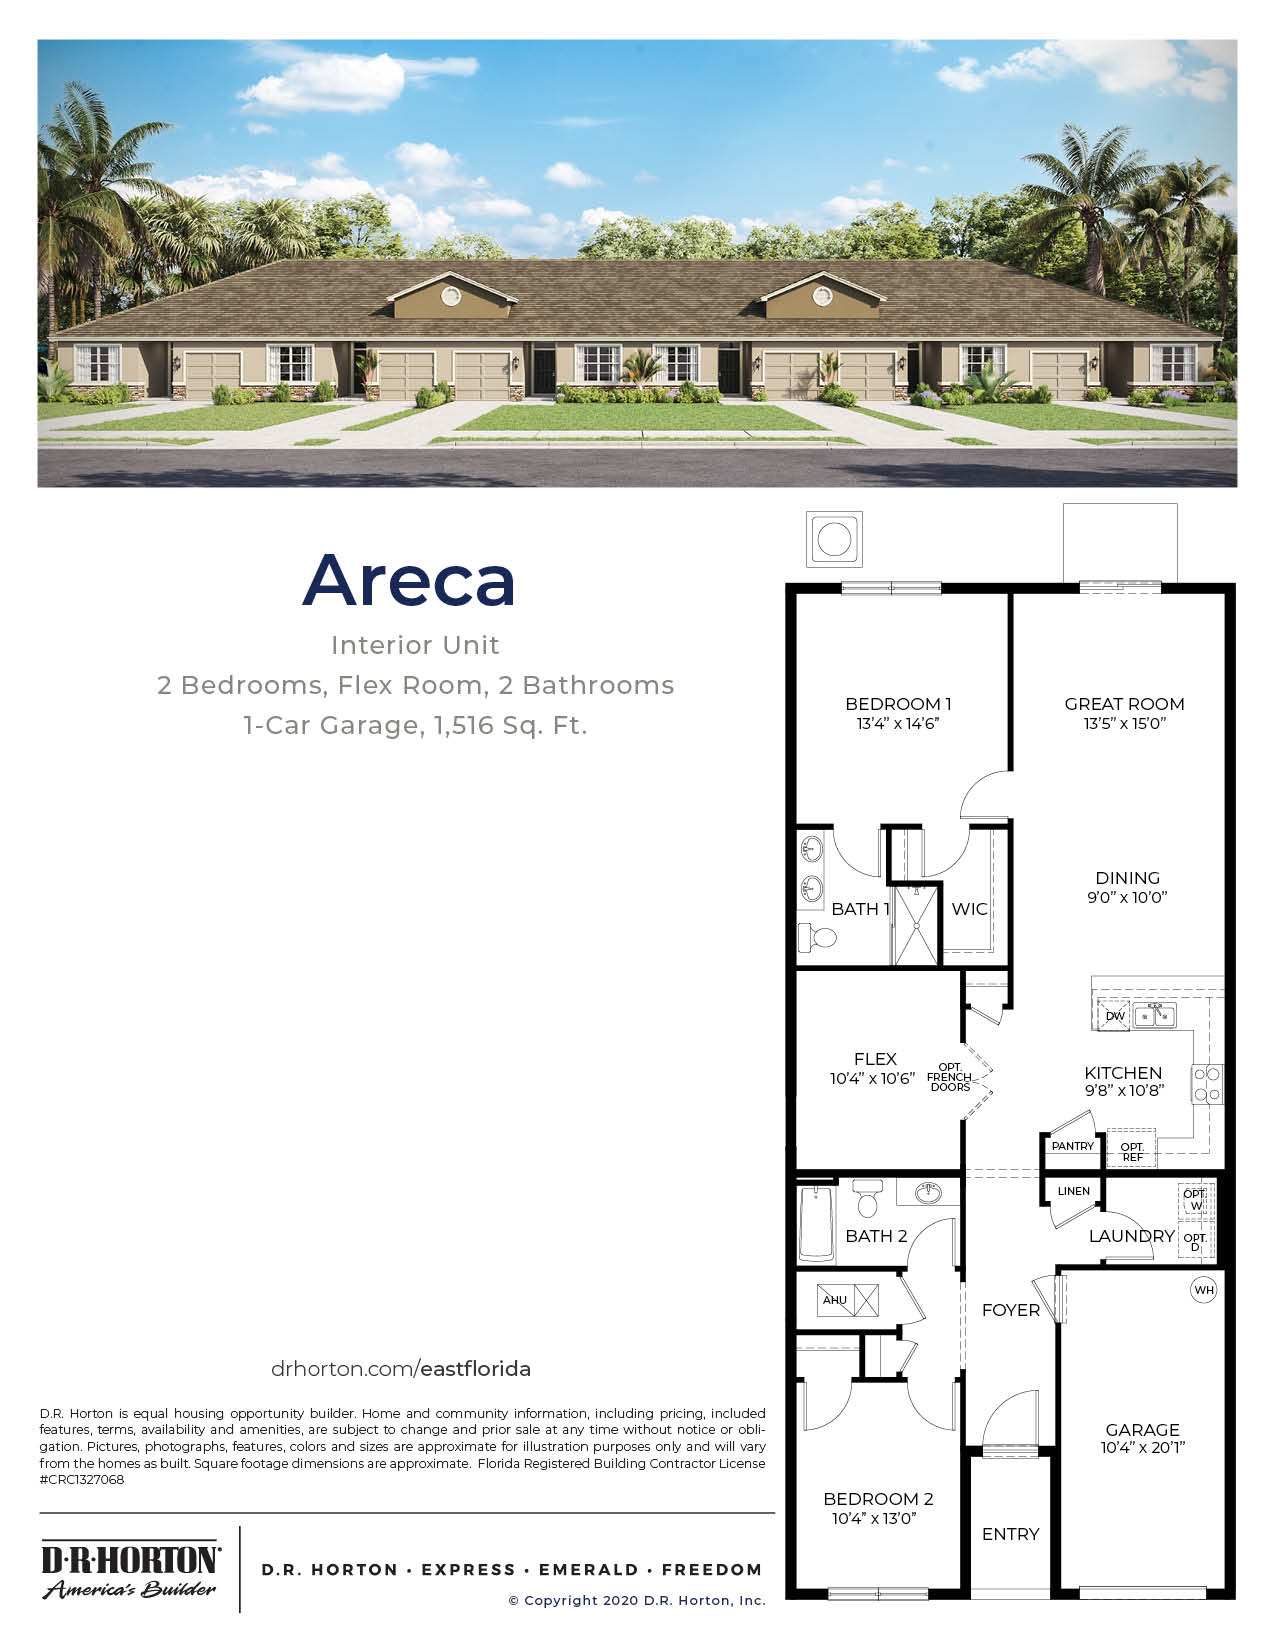 Palm Gardens Areca Floor Plans and Pricing